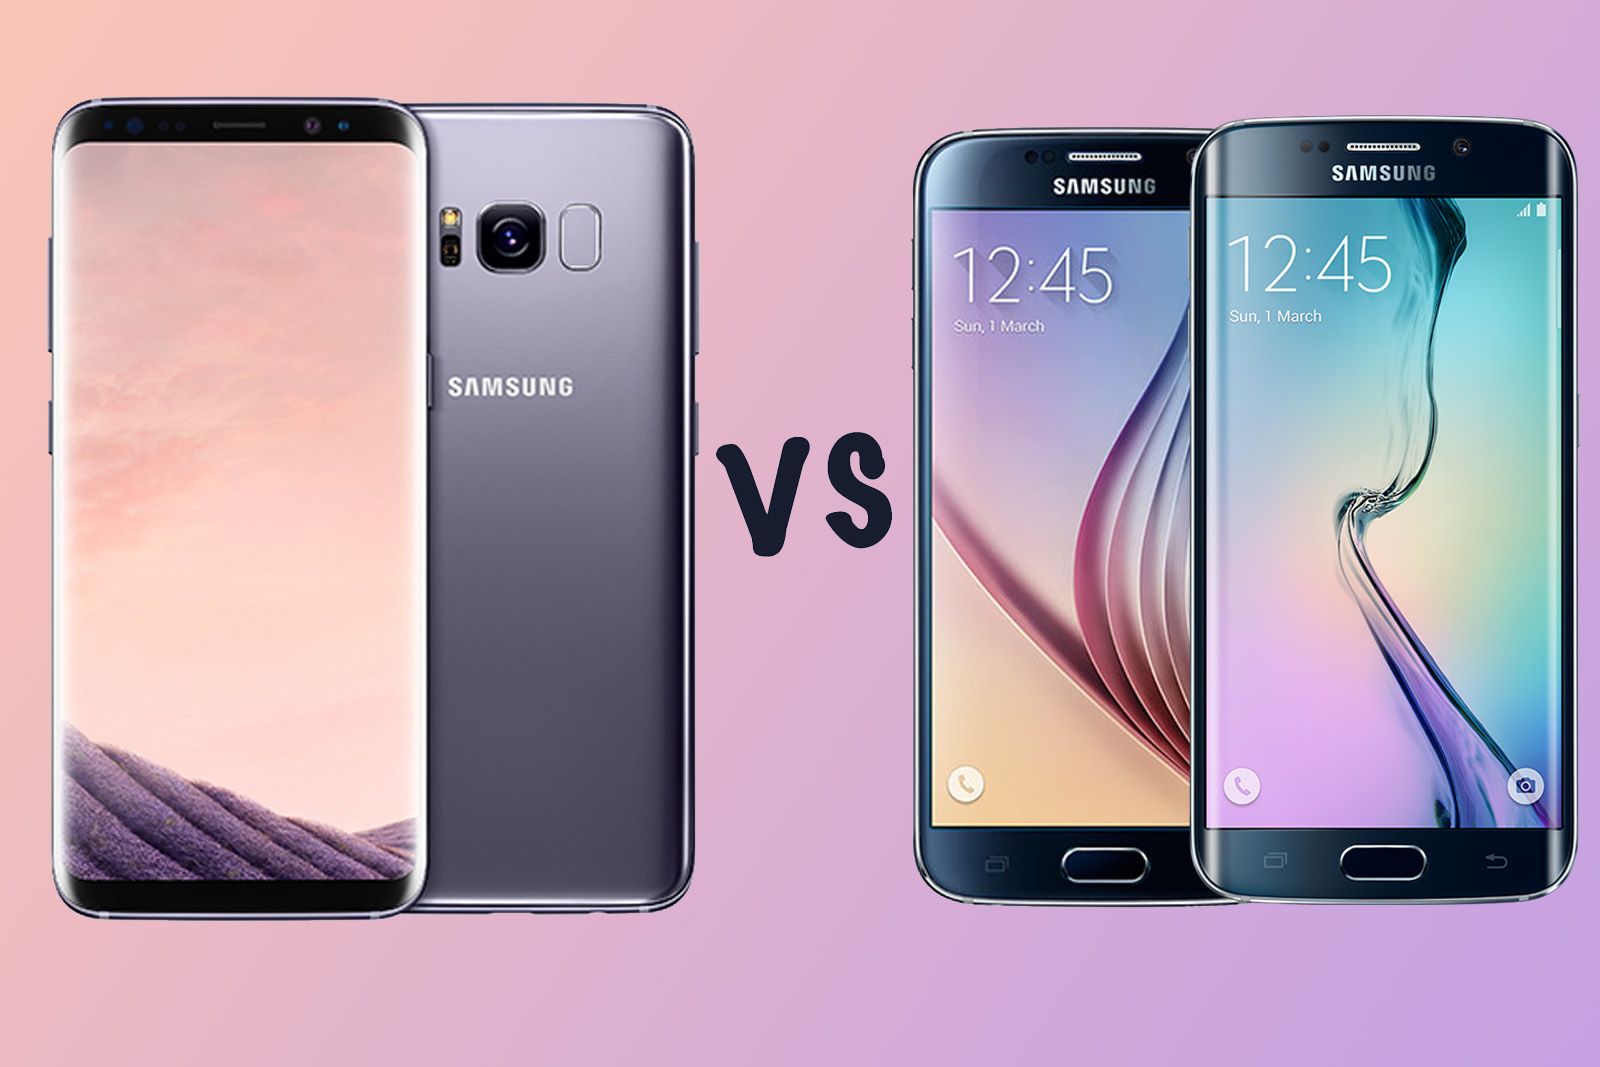 samsung galaxy s8 vs s8 plus vs s6 vs s6 edge what s the difference  image 1